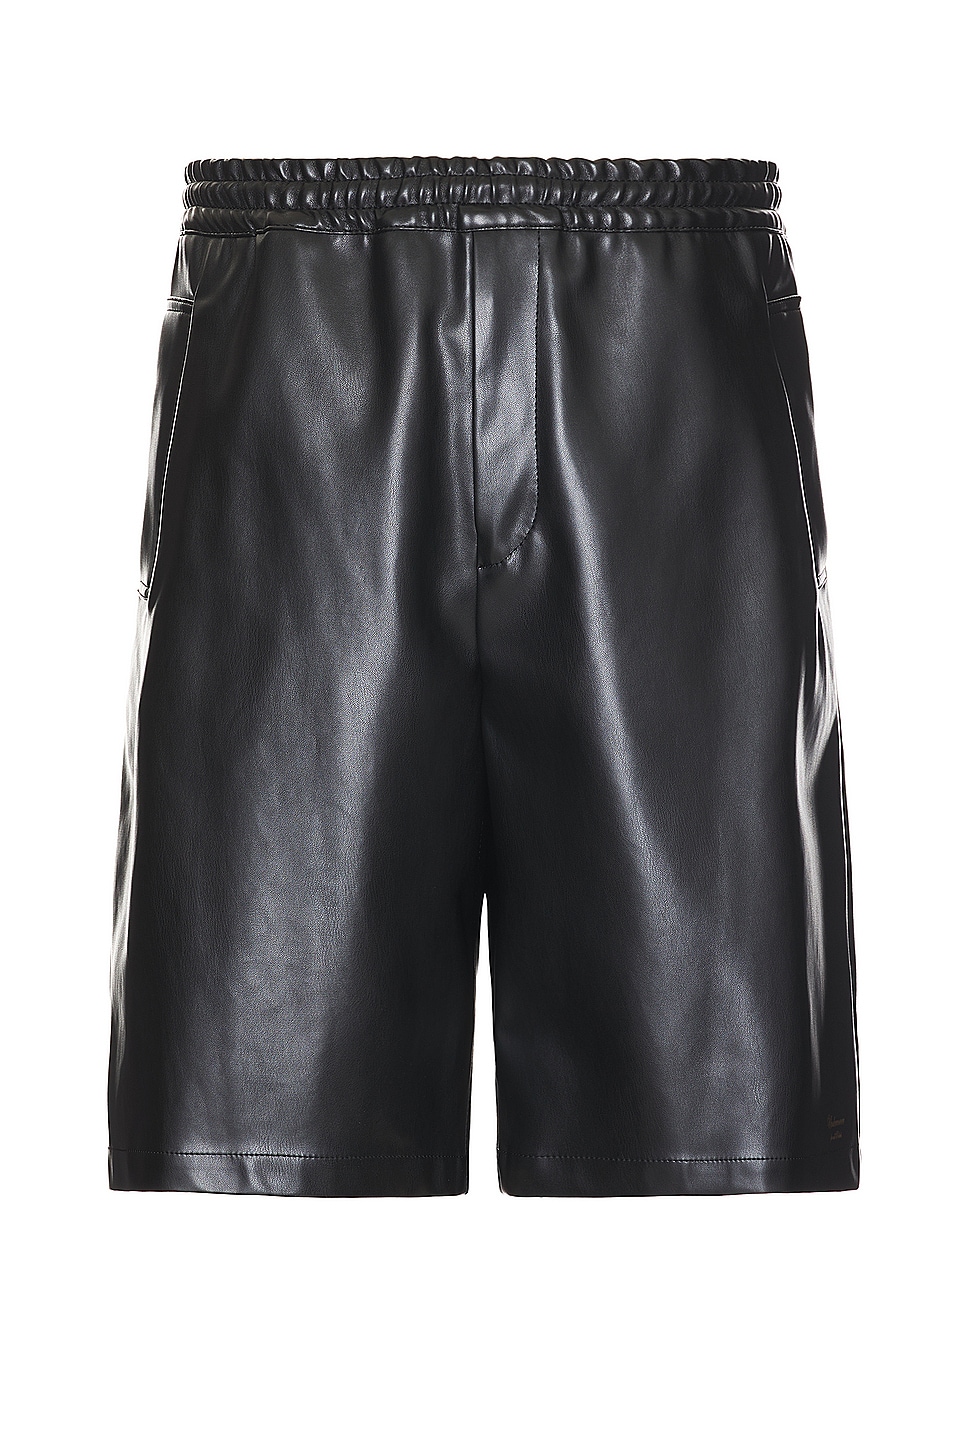 Image 1 of Undercover Track Short in Black